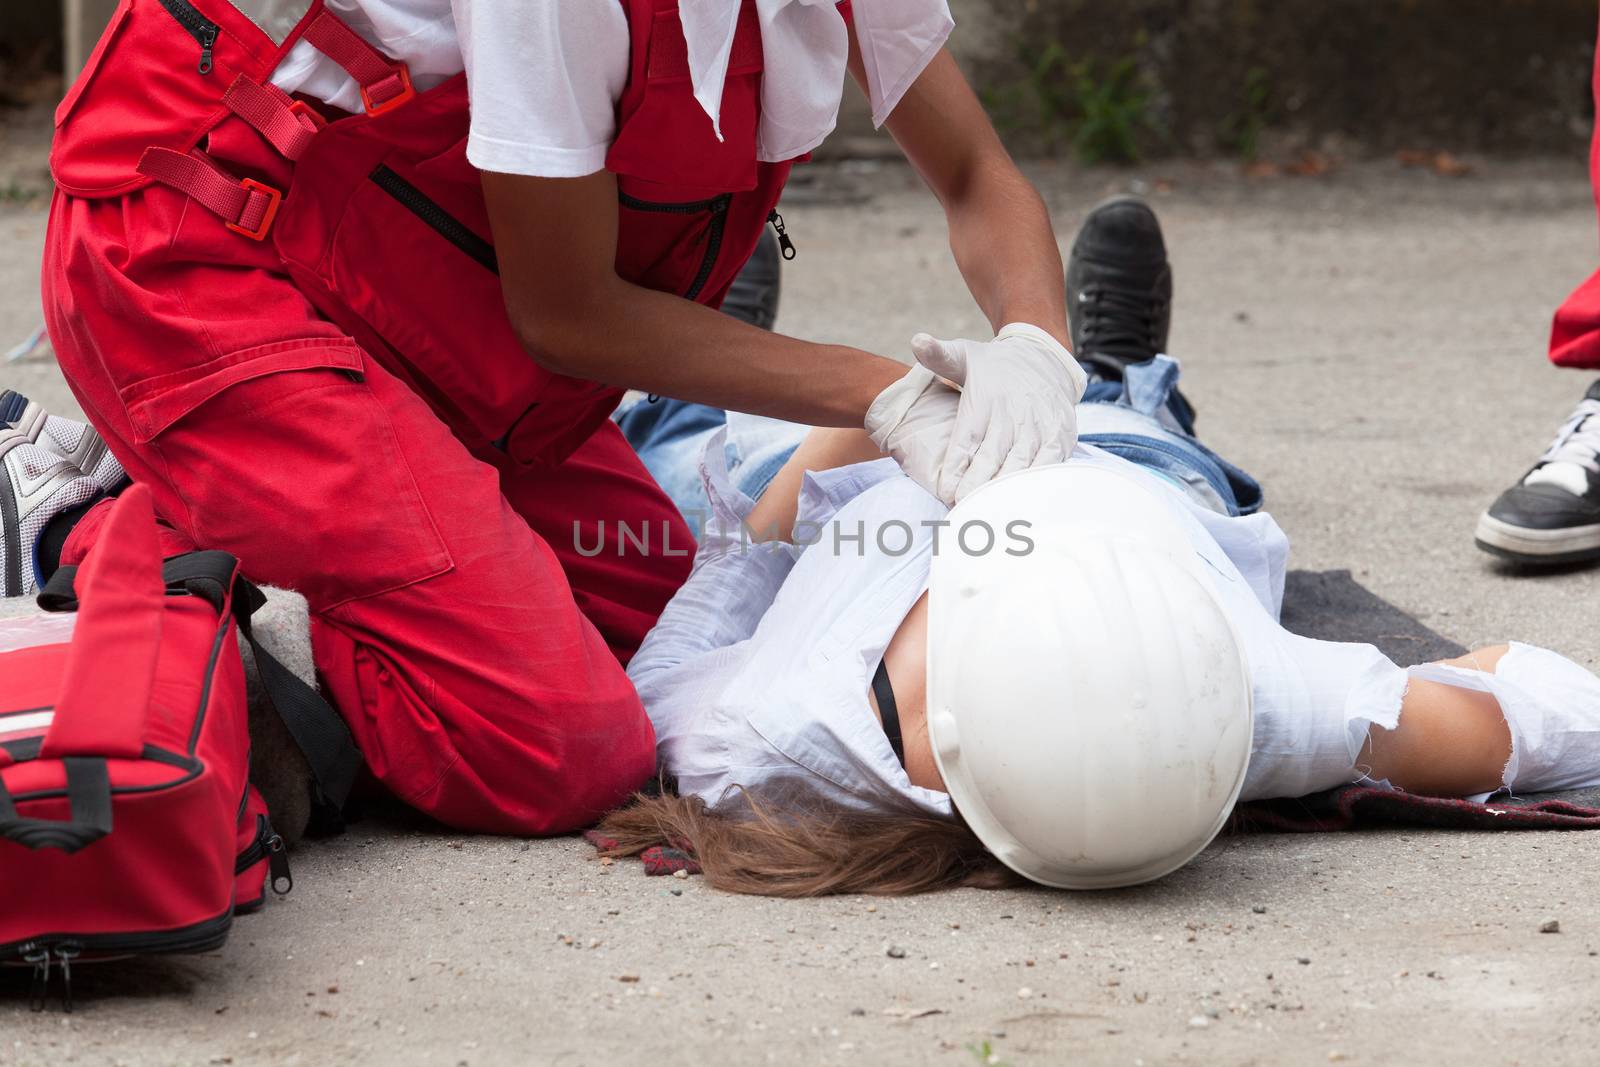 Workplace accident - First aid after occupational injury